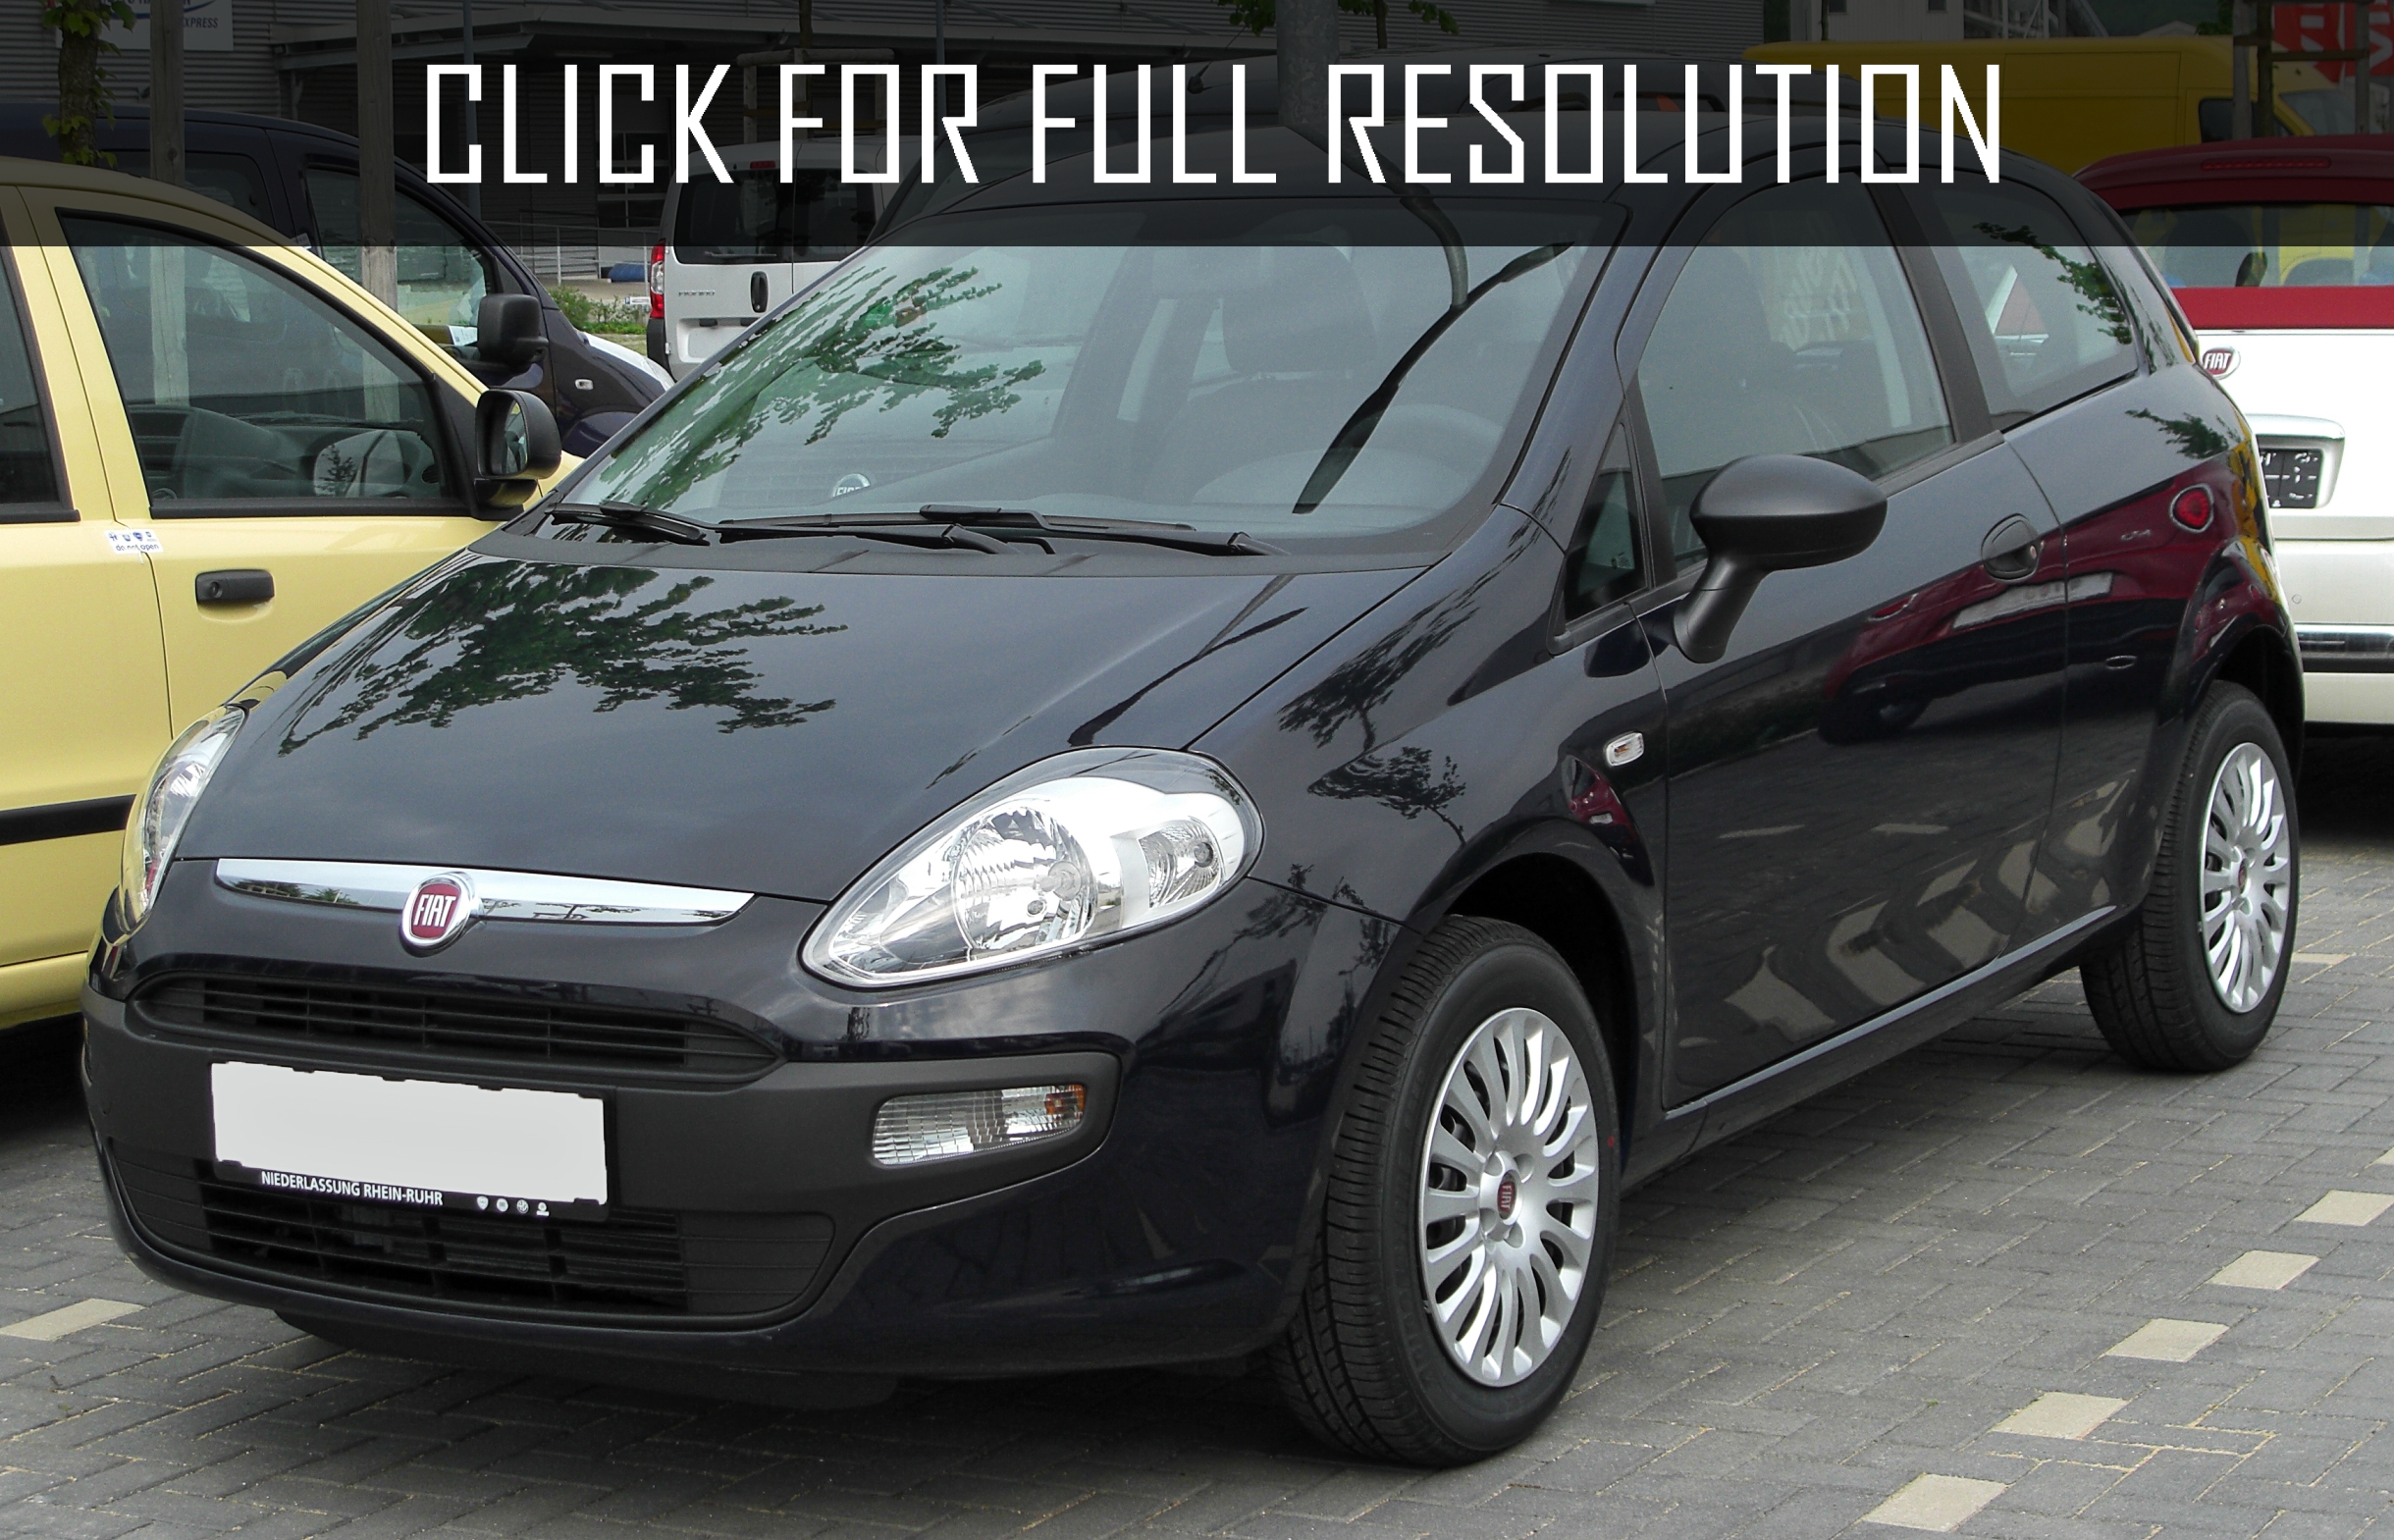 2013 Fiat Punto Evo news, reviews, msrp, ratings with